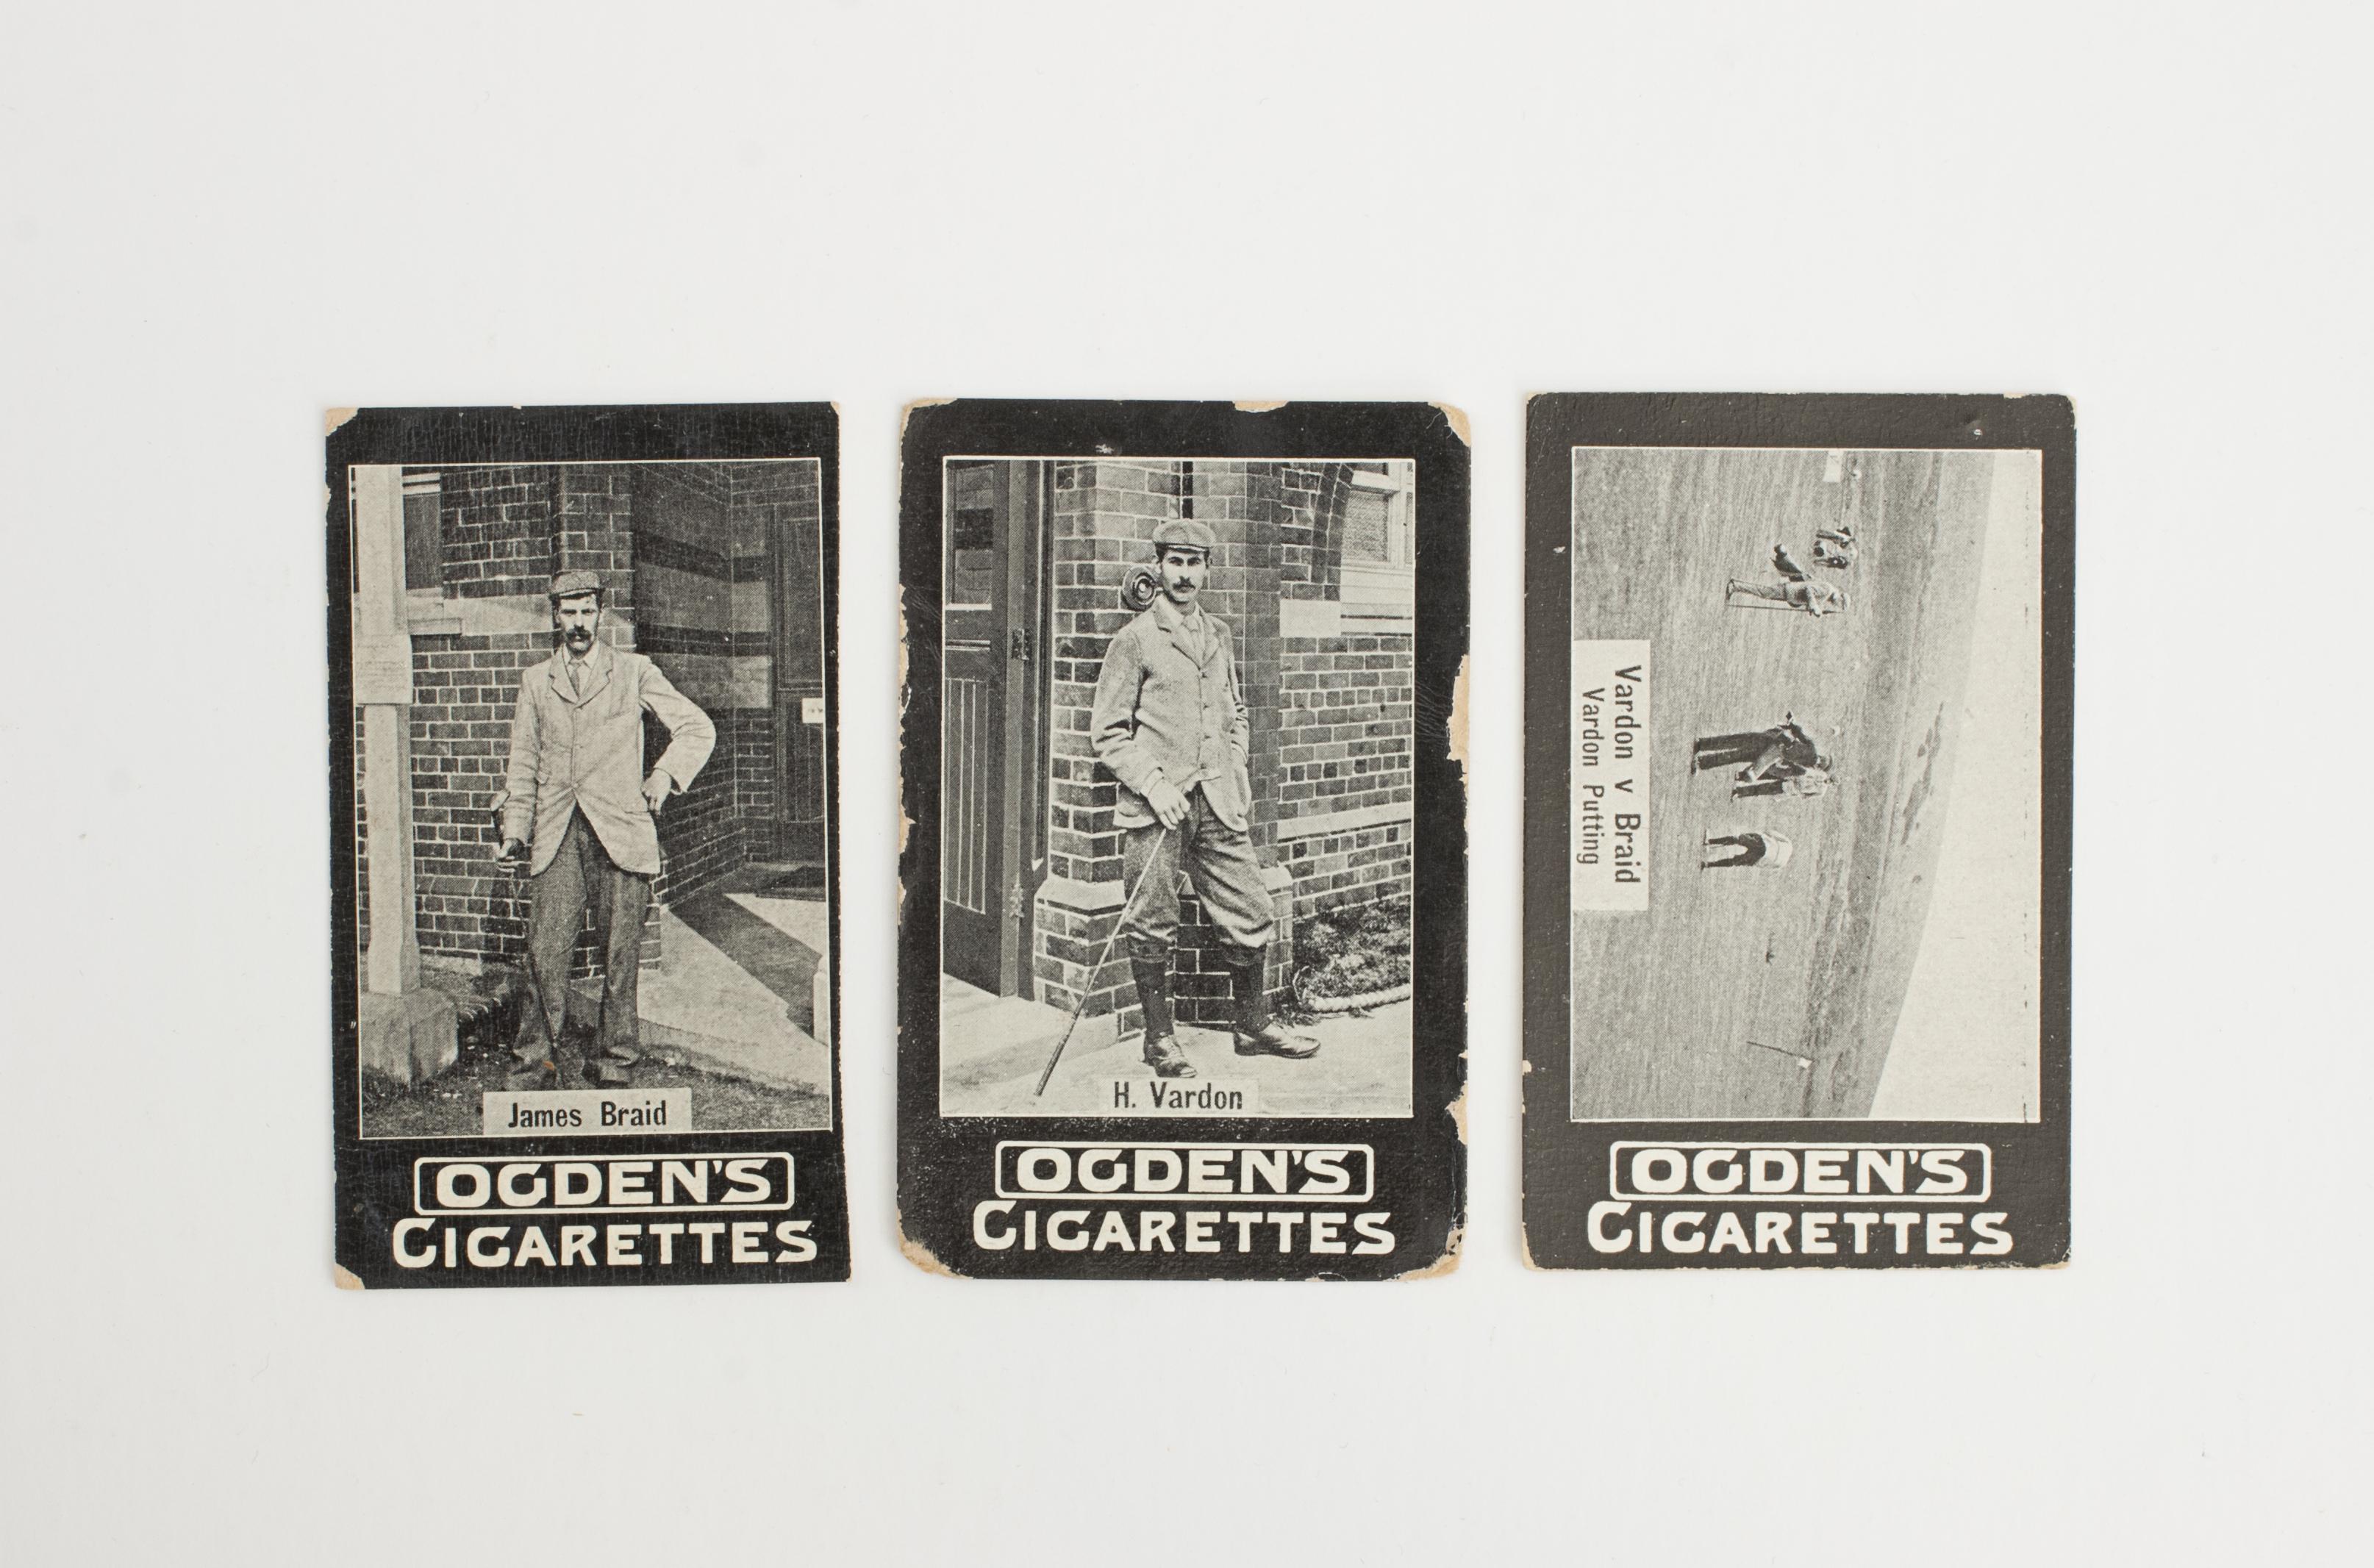 Ogden Tabs Golf Cigarette Cards.
The three 'Ogden's Cigarettes' cards show the Open Golf Champions of the past, James (misspelt 'John') Braid and Harry Vardon. The Ogden Tabs cards are from the 'F series, General Interest' which contained 420